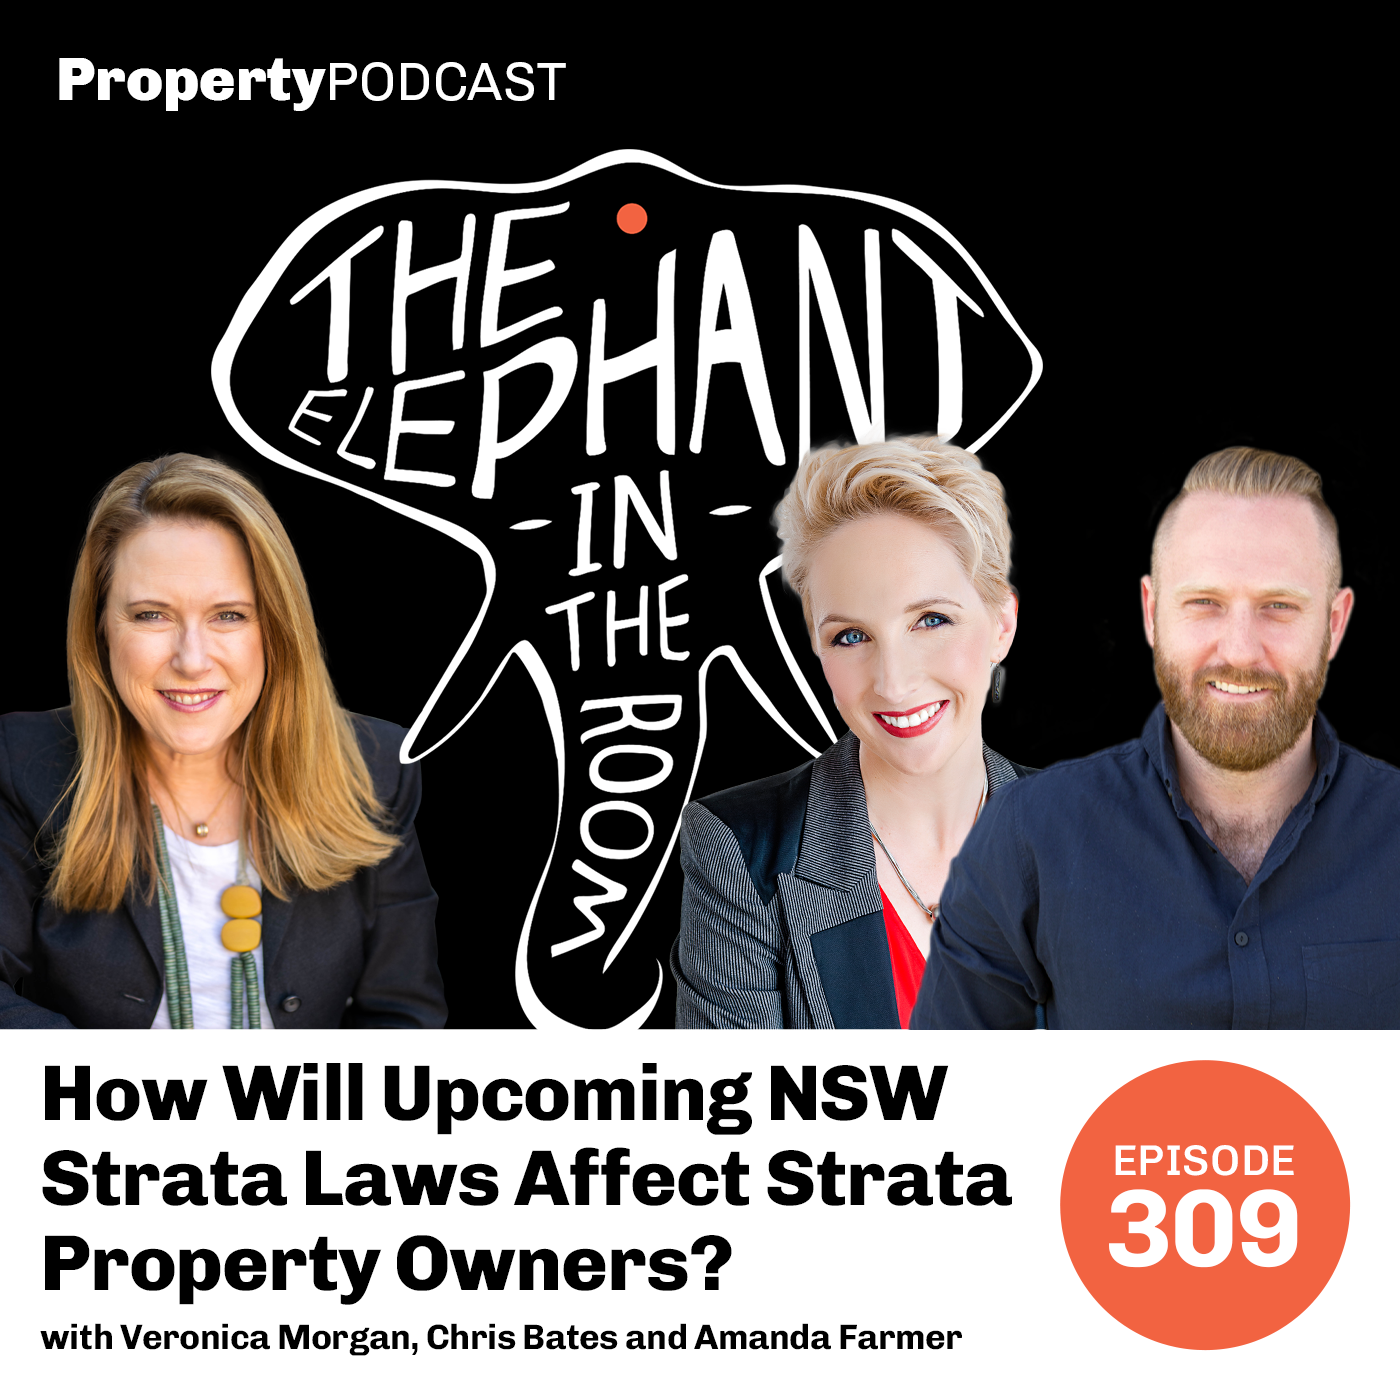 How Will Upcoming NSW Strata Laws Affect Strata Property Owners?